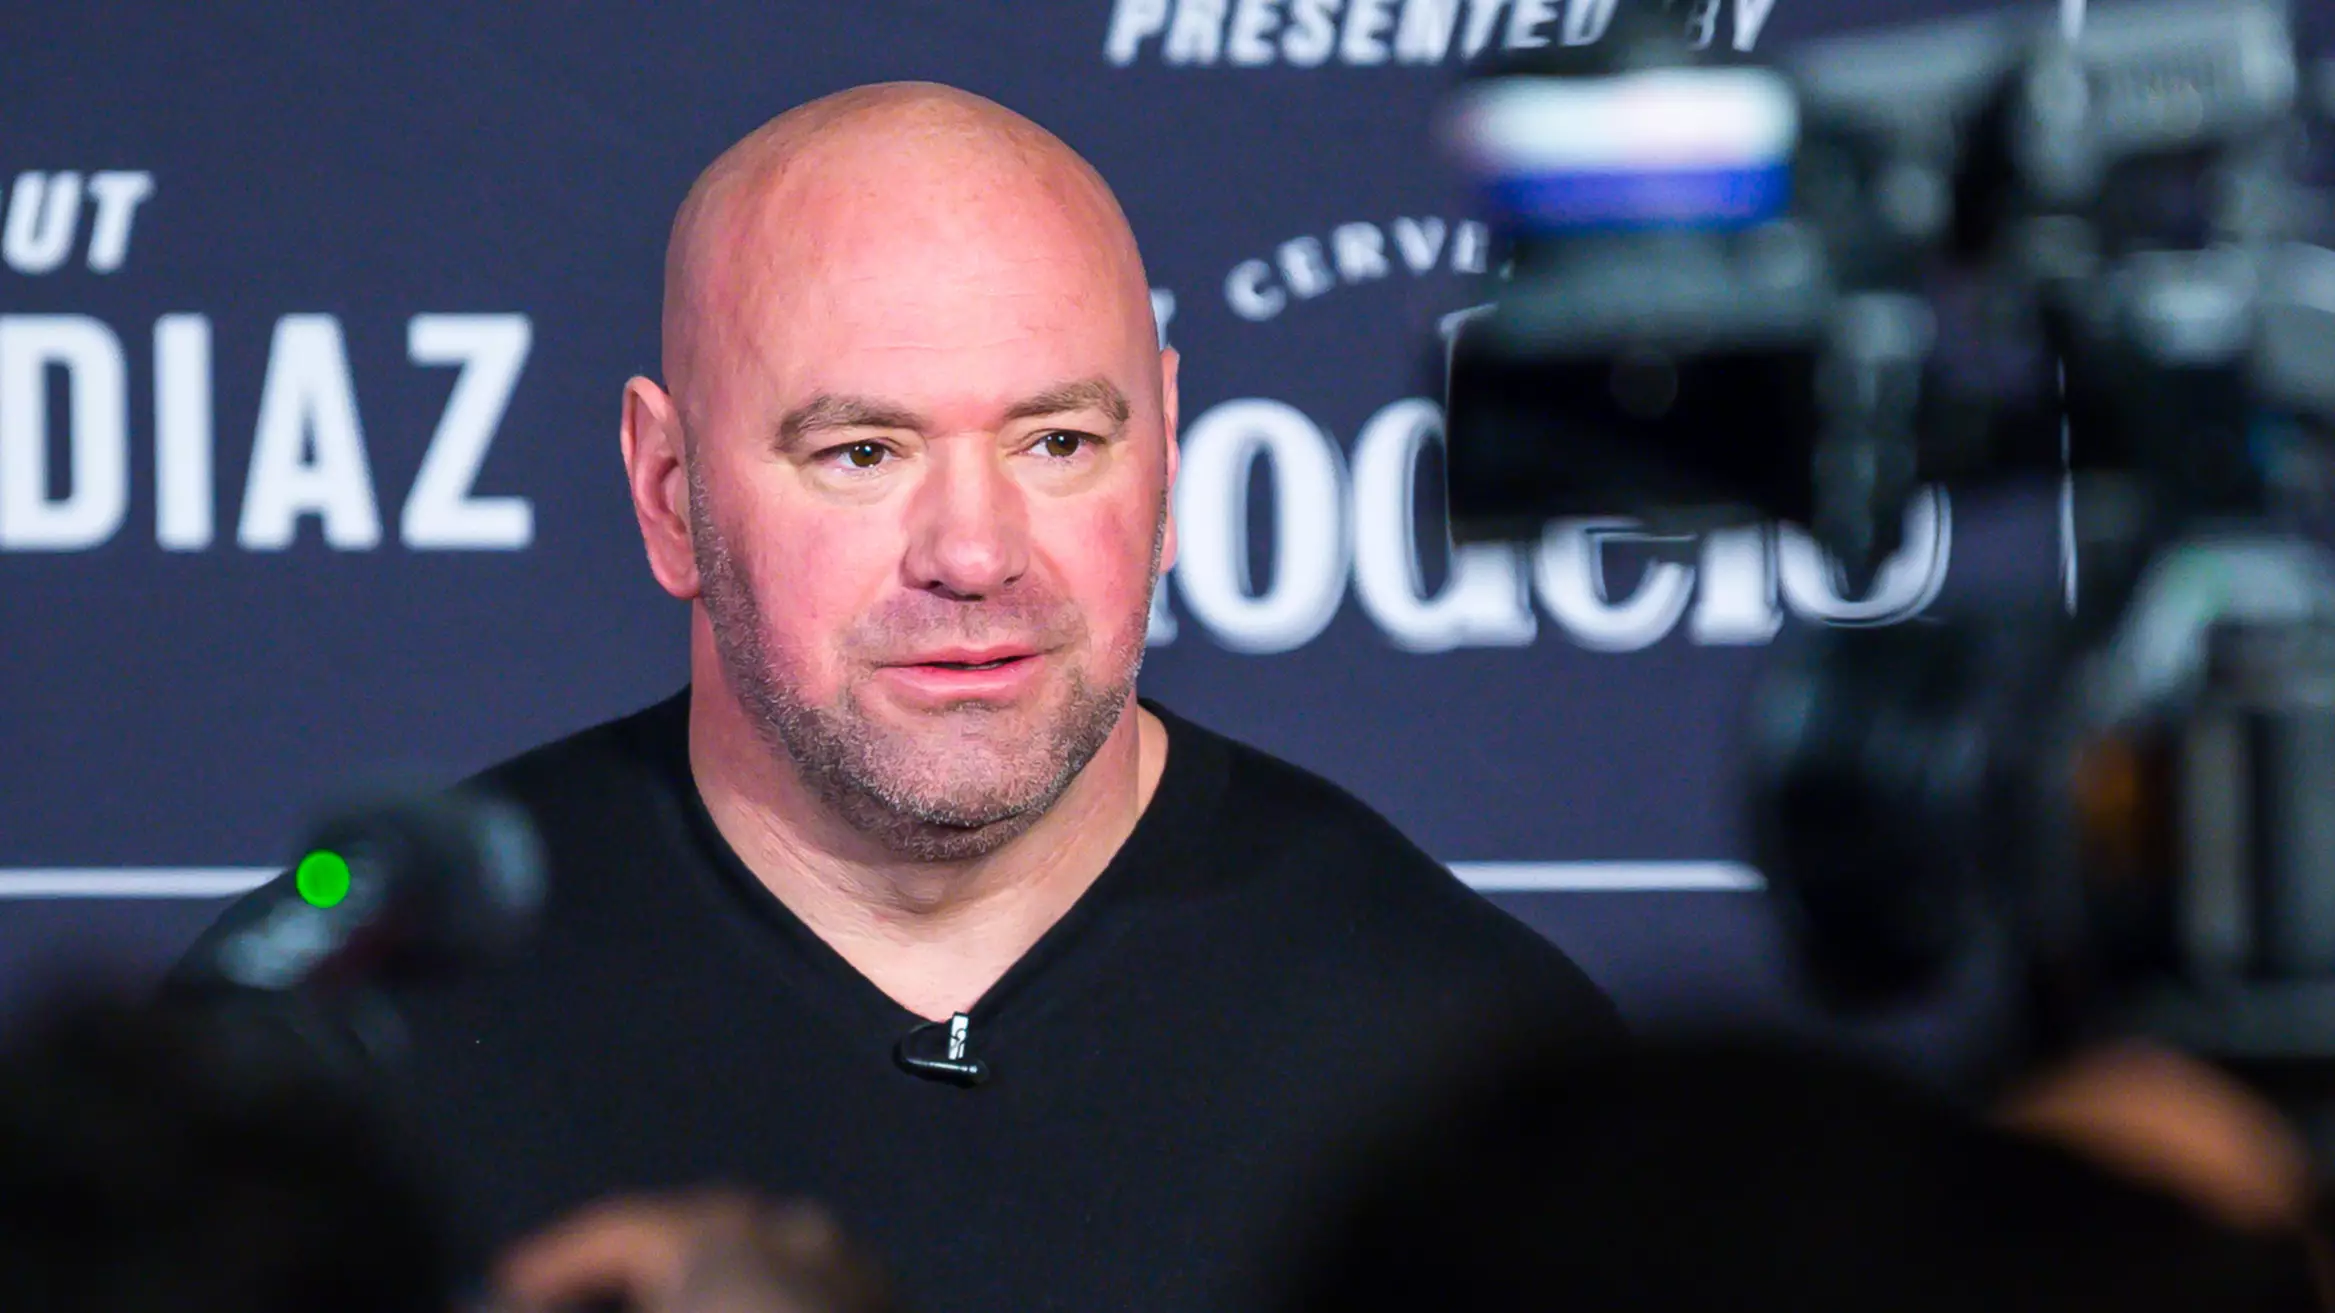 Dana White Reveals The One Fighter Not Willing To Compete Due To COVID-19 